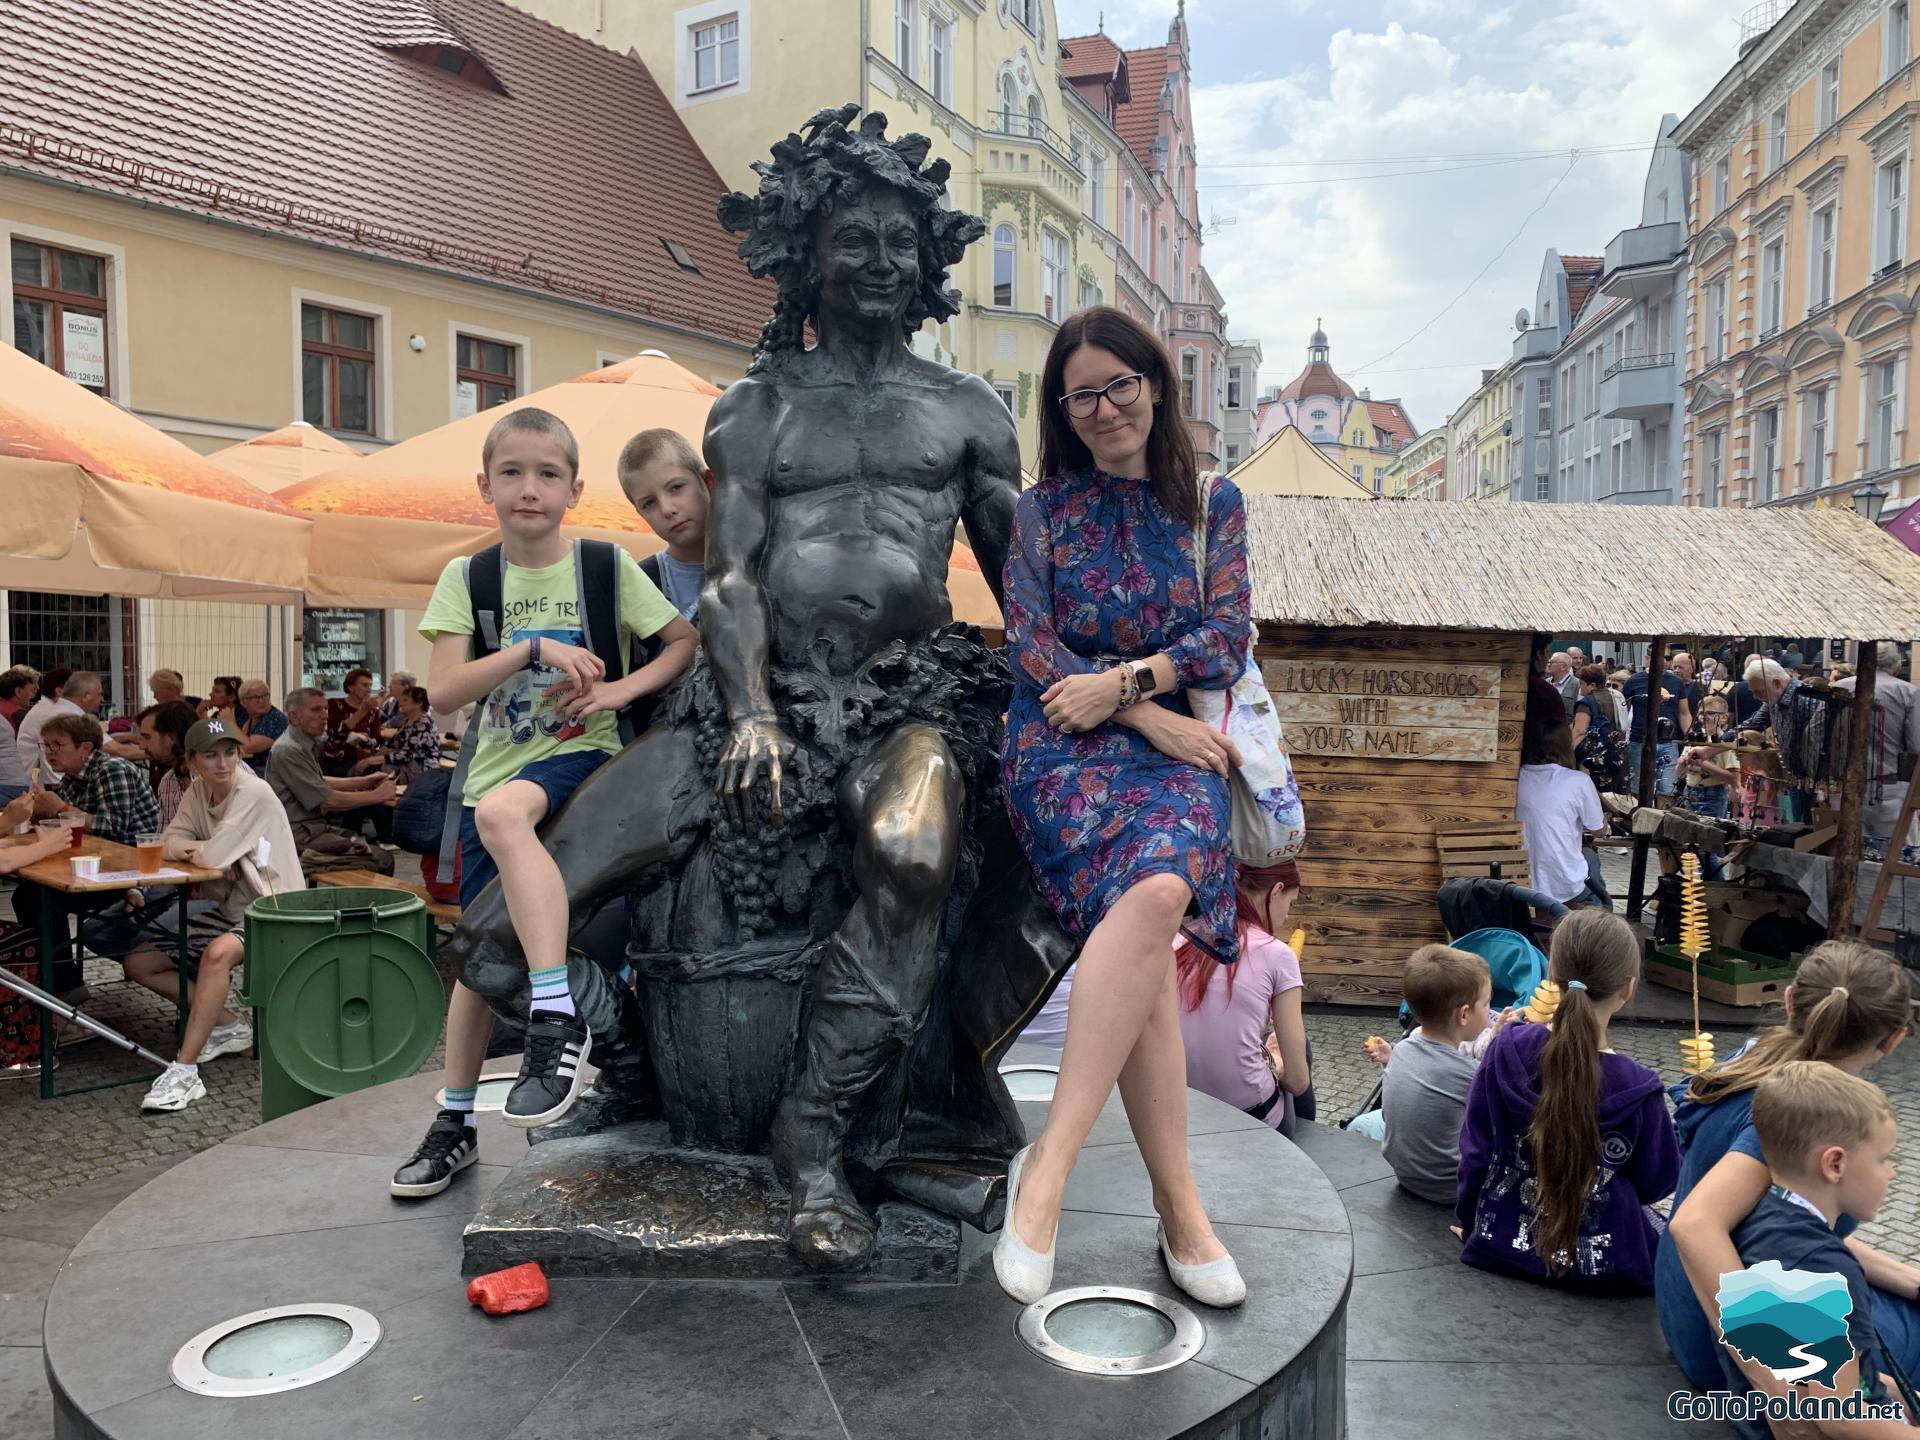 A woman and 2 kids sitting next to the Bacchus sculpture